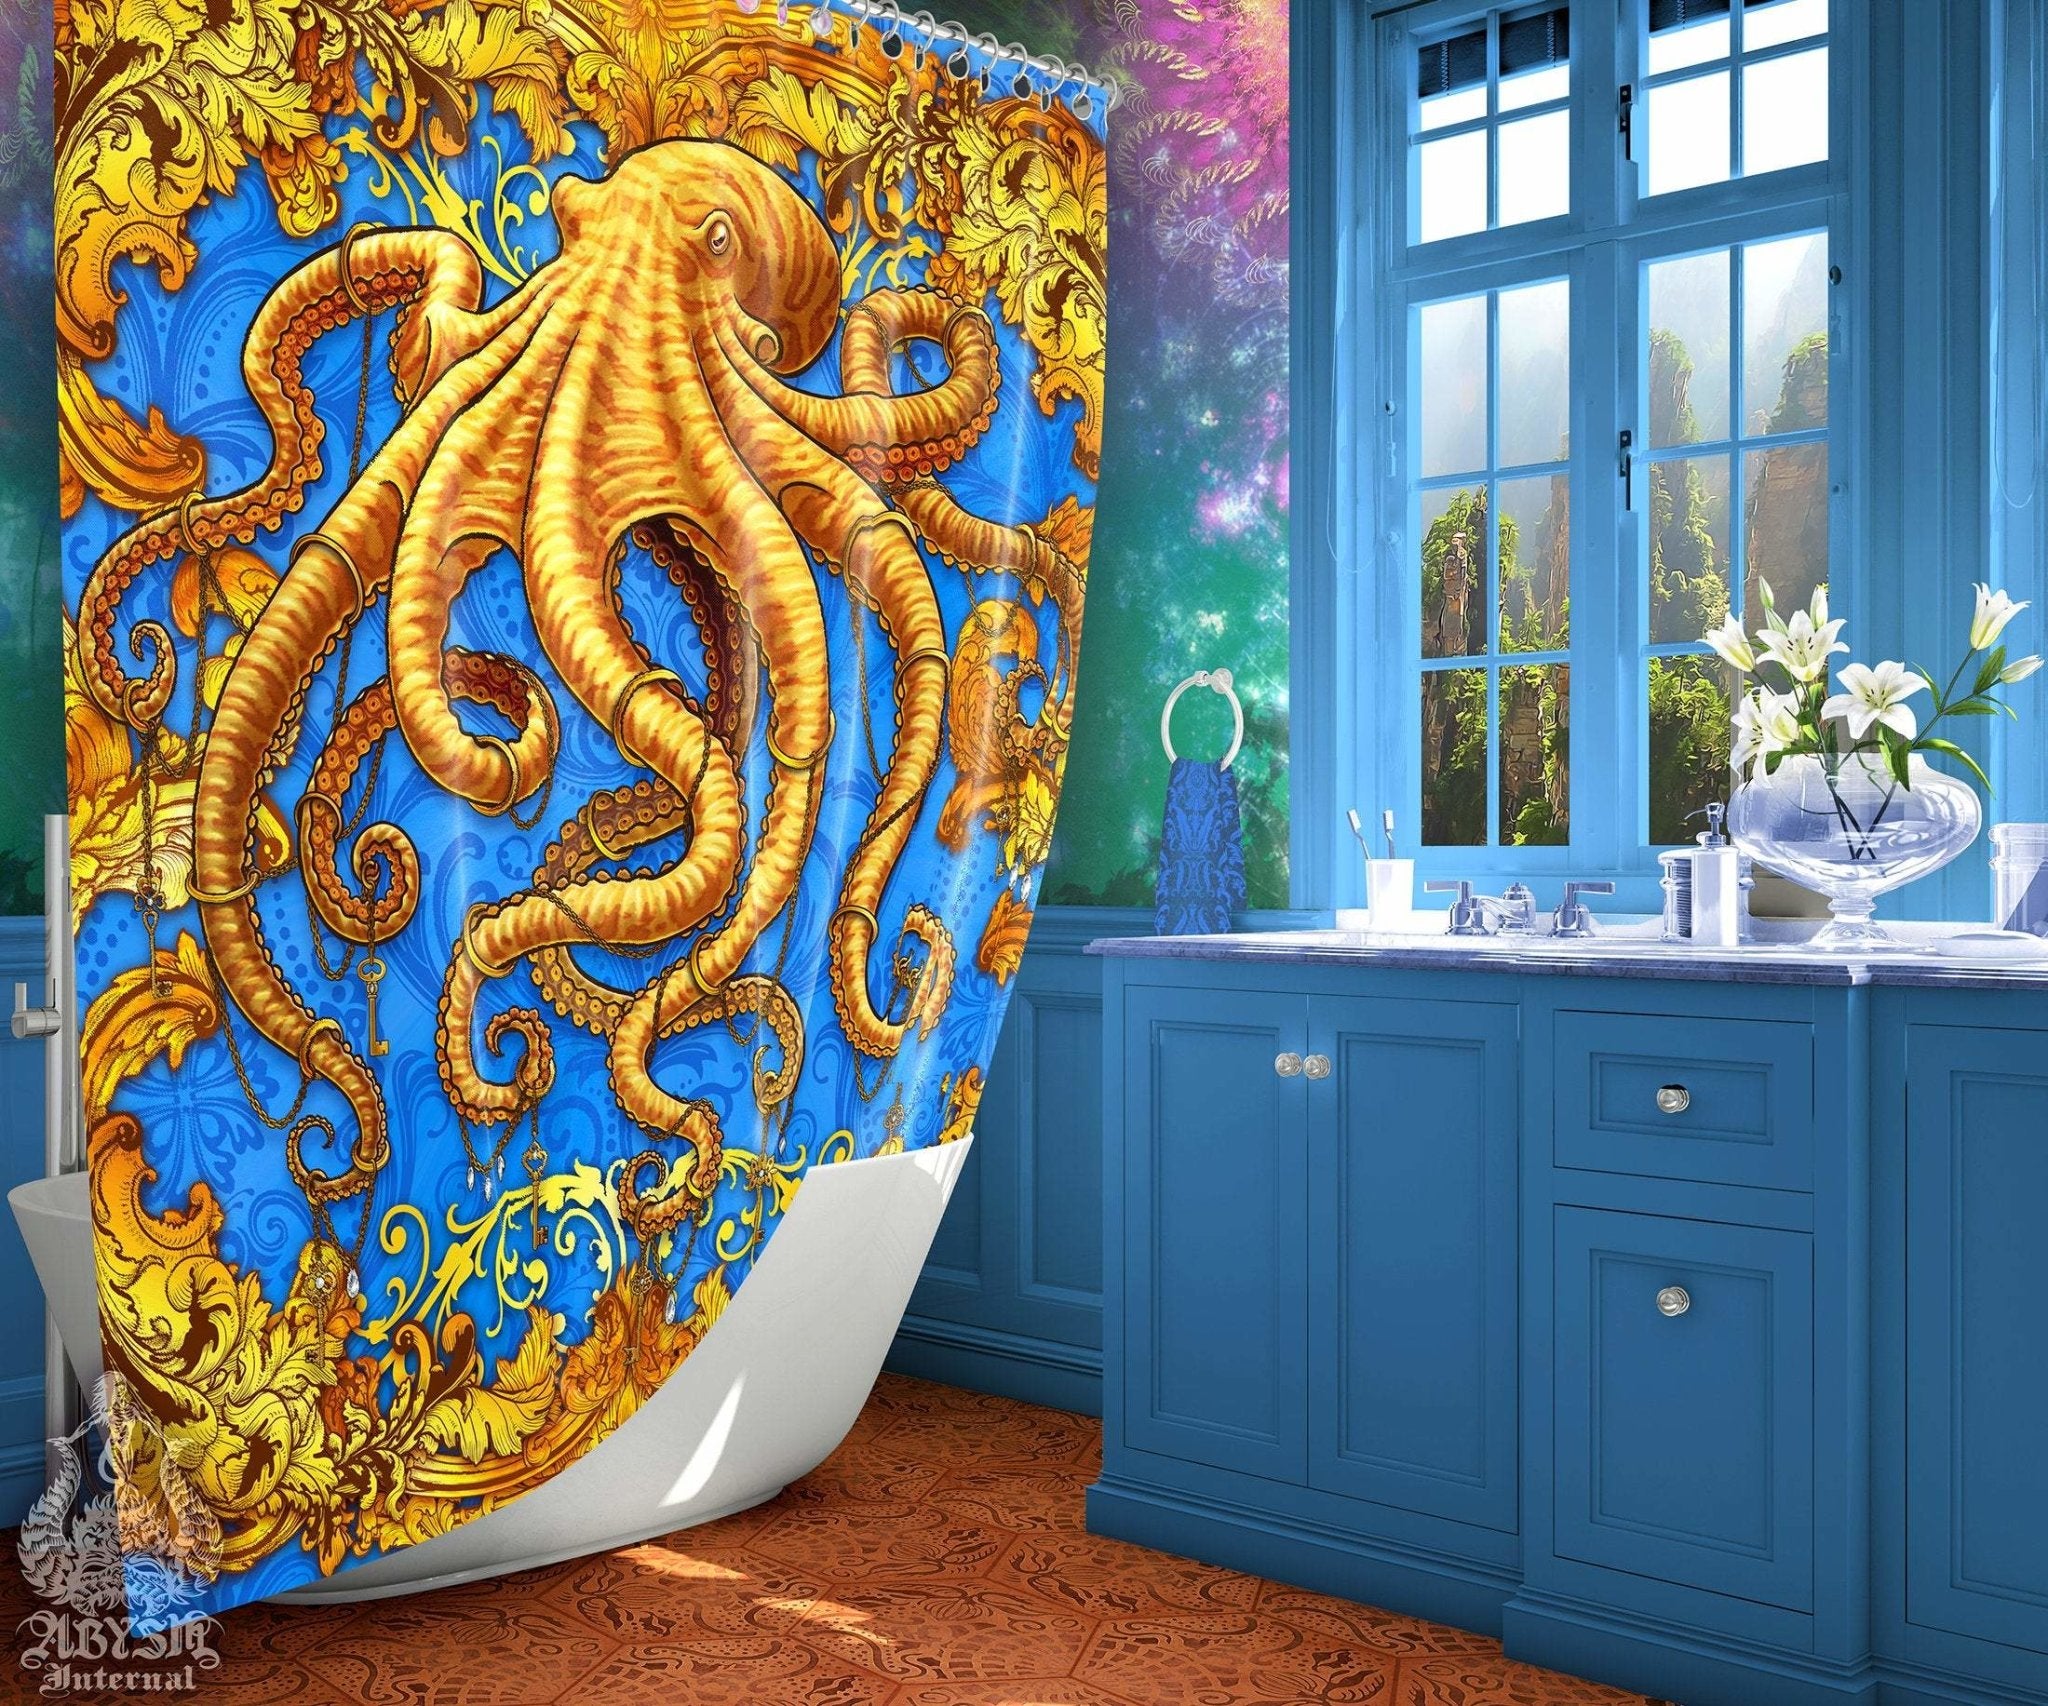 Octopus Shower Curtain, Beach Bathroom Decor, Vintage and Baroque, Eclectic and Funky Home - Cyan & Gold - Abysm Internal